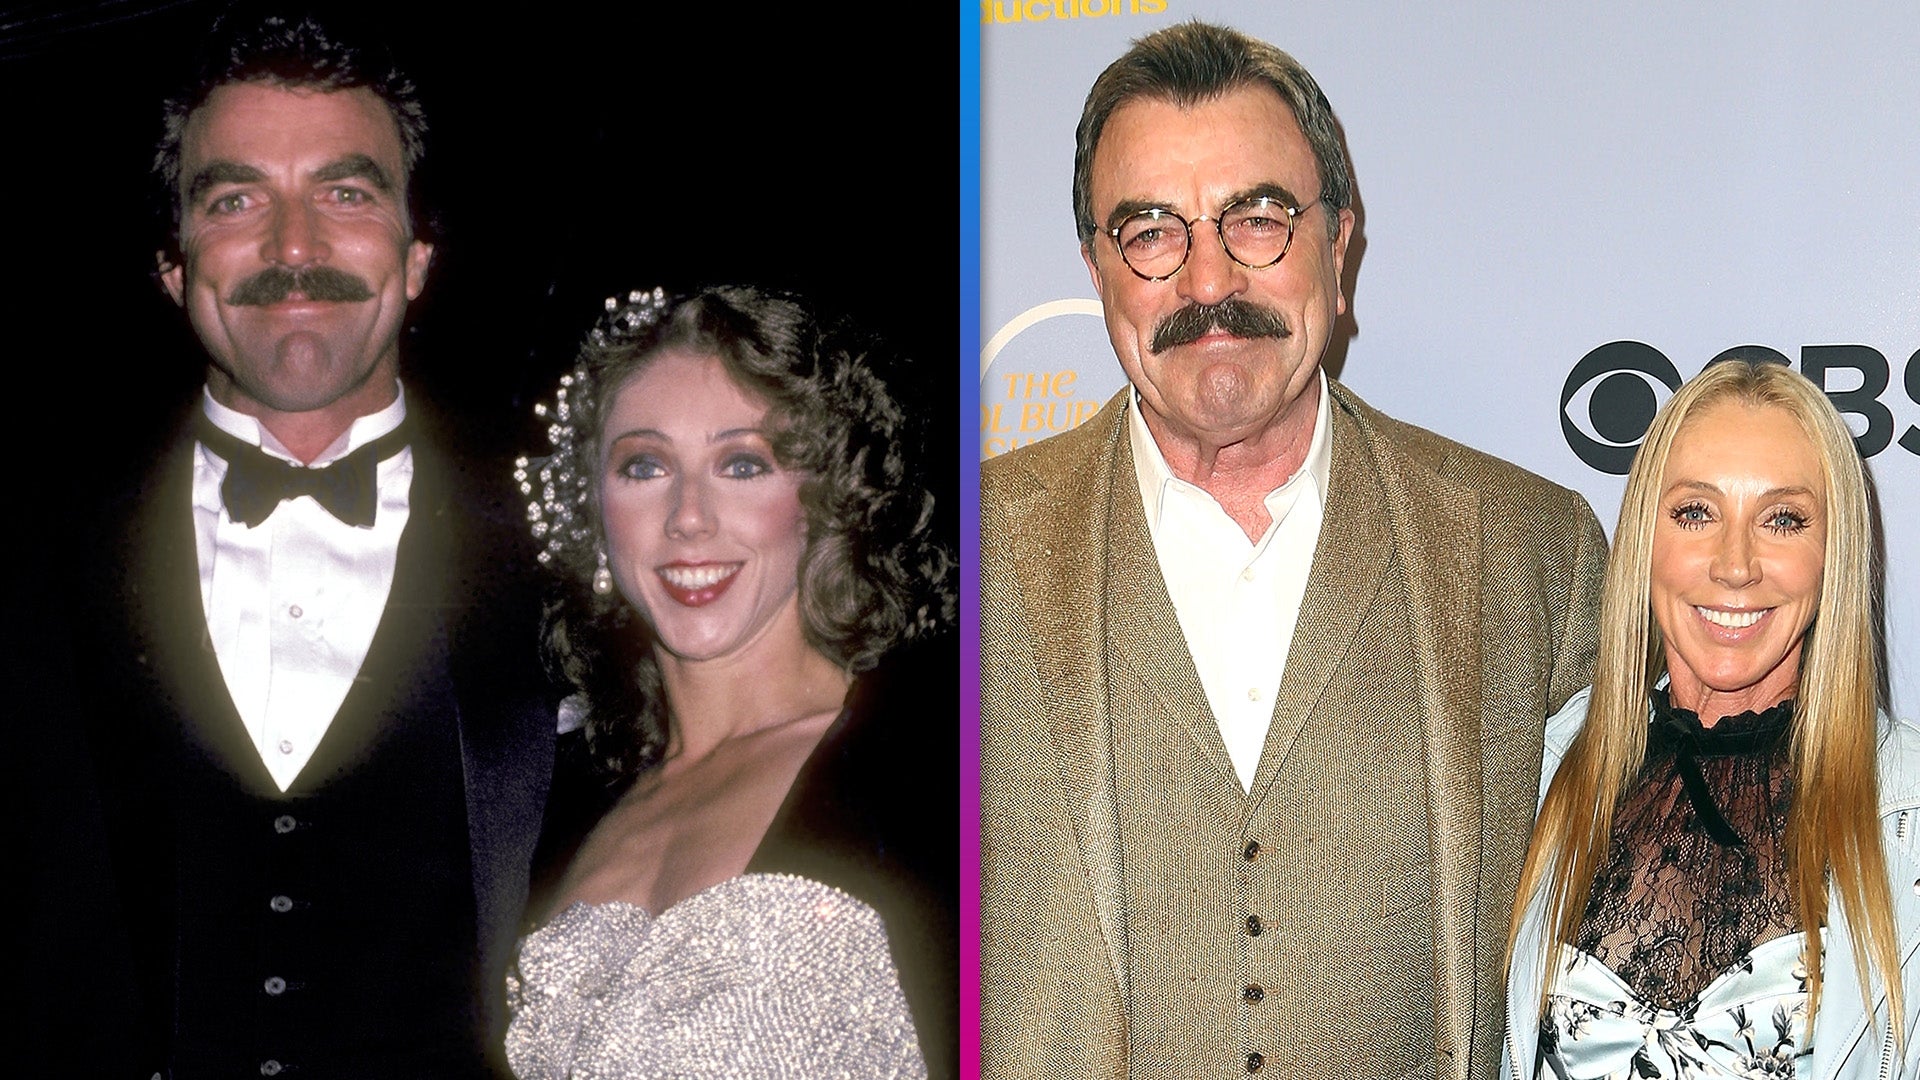 Inside Tom Selleck and Wife Jillie Macks Love Story as They Celebrate 35th Wedding Anniversary pic